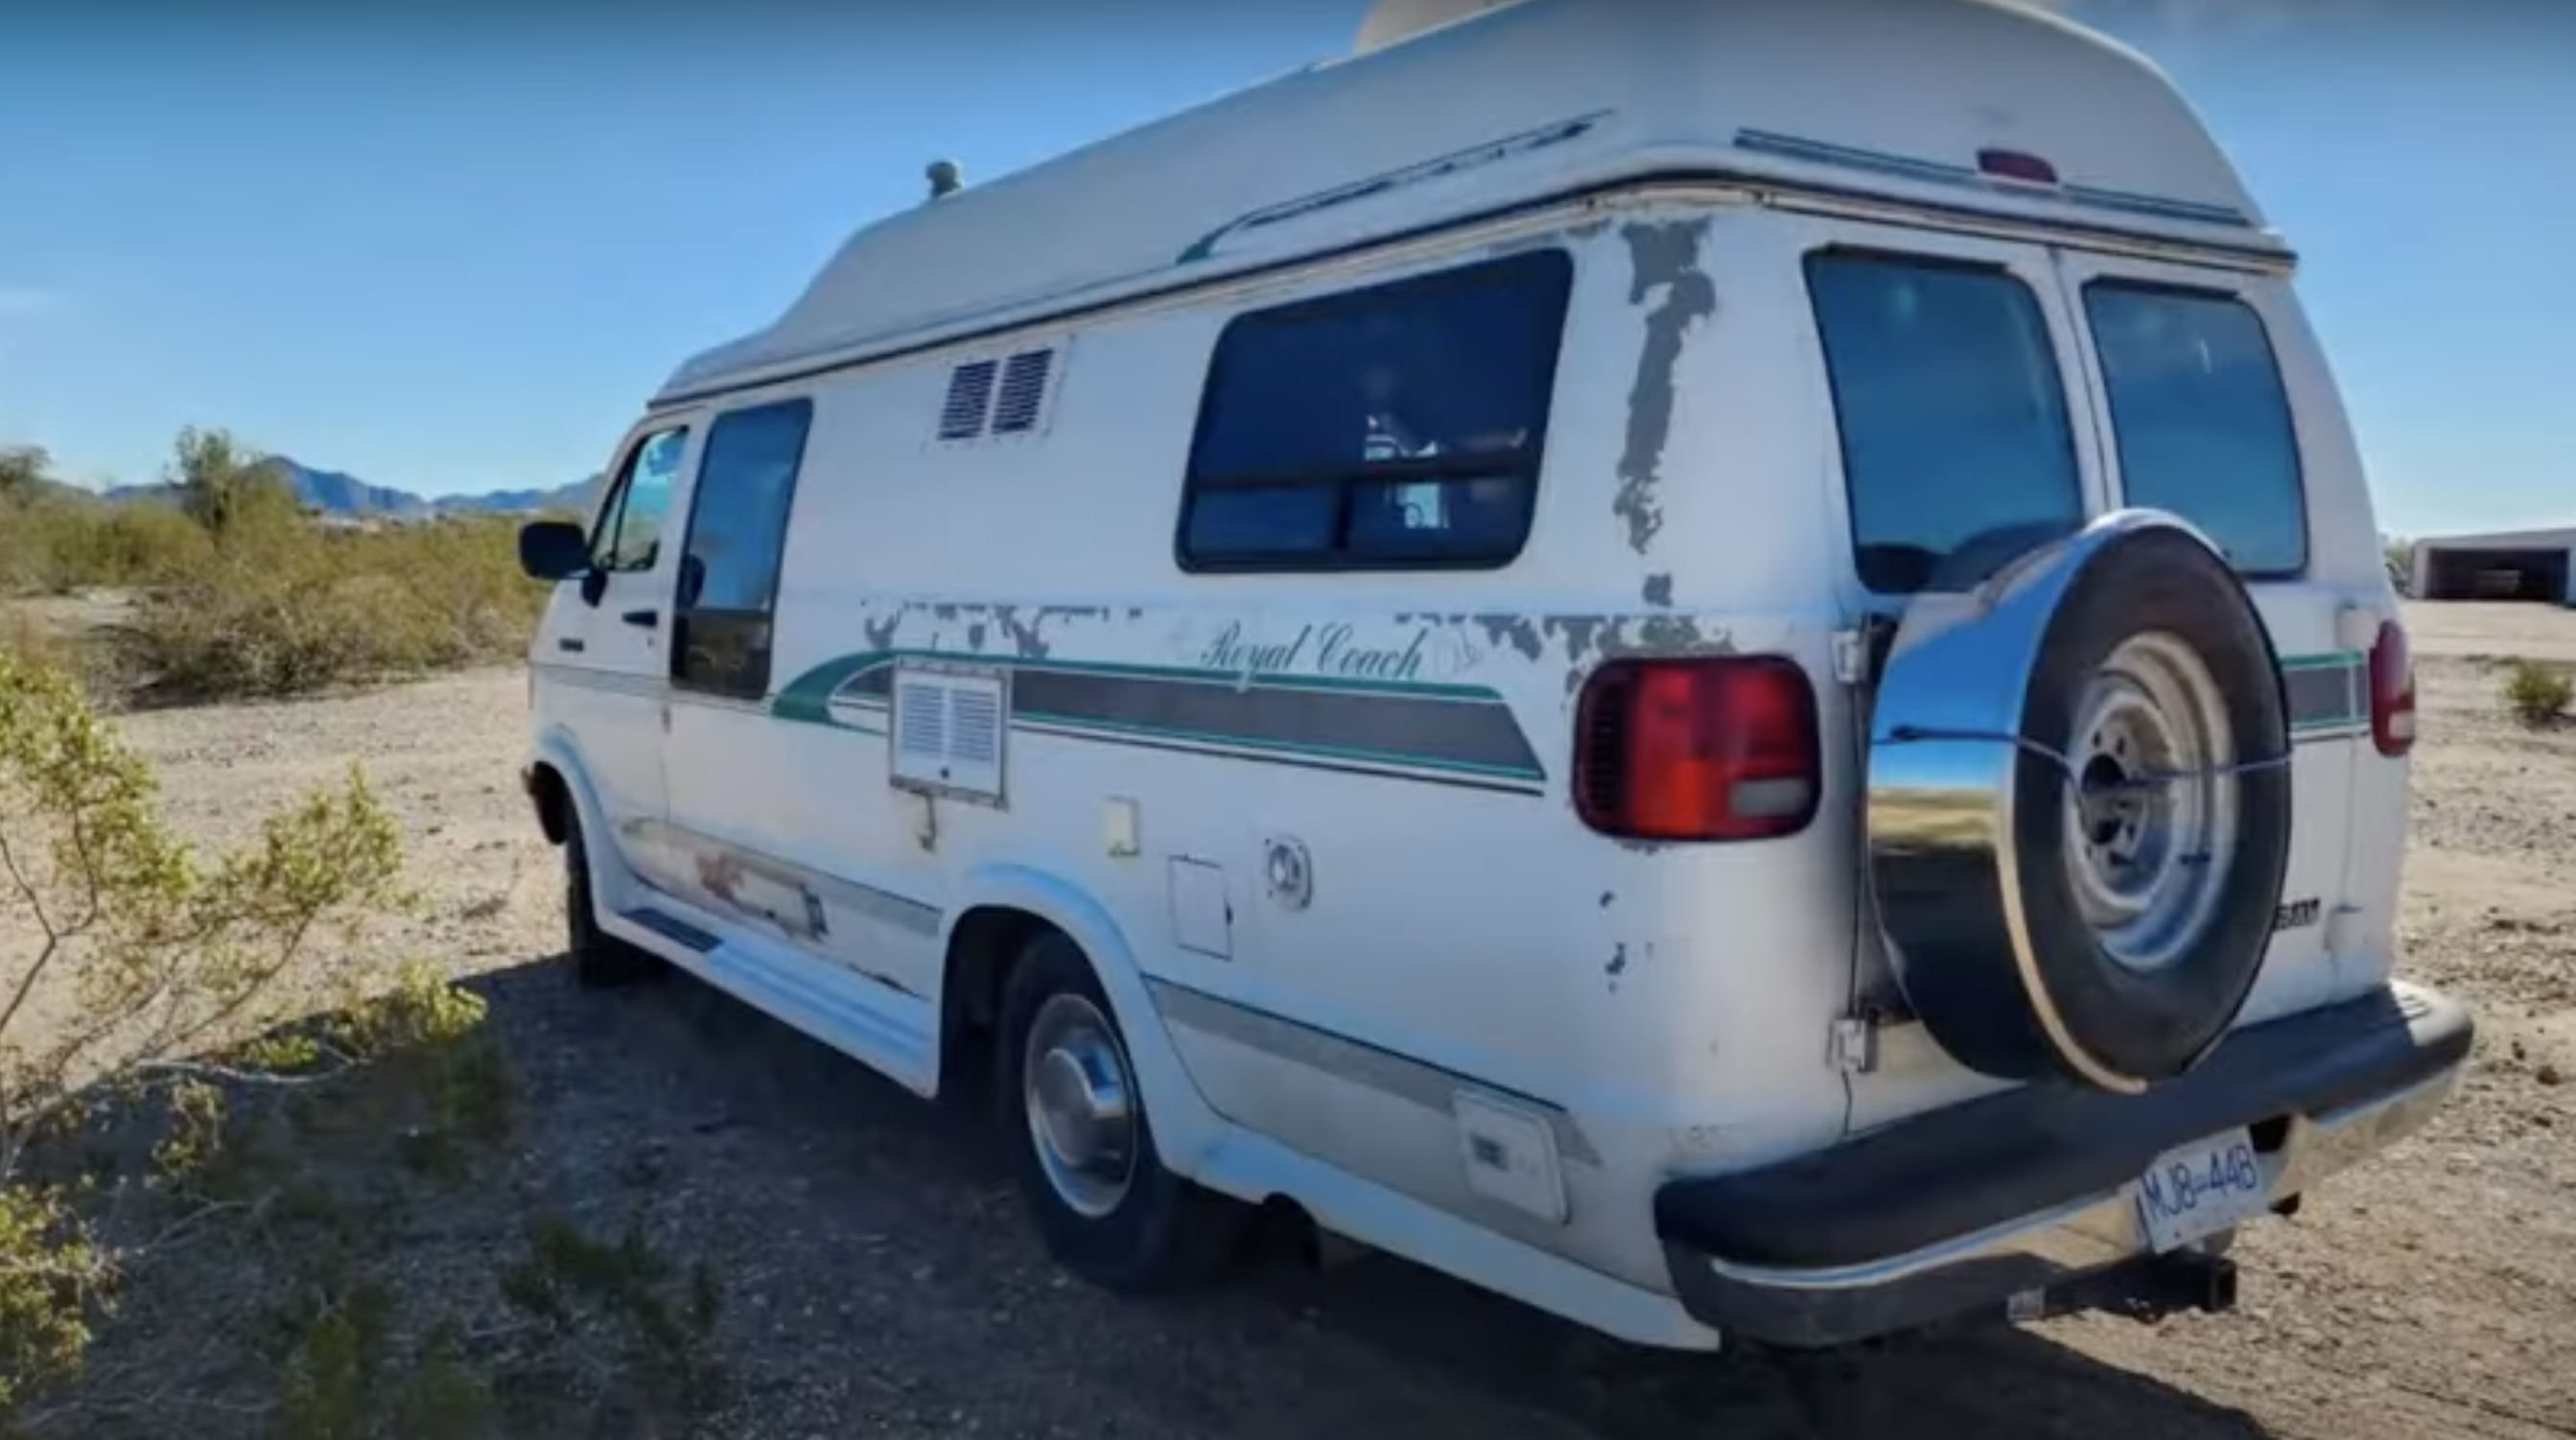 The 1994 Dodge Ram Royal Coach boasts a kitchen, bed and toilet